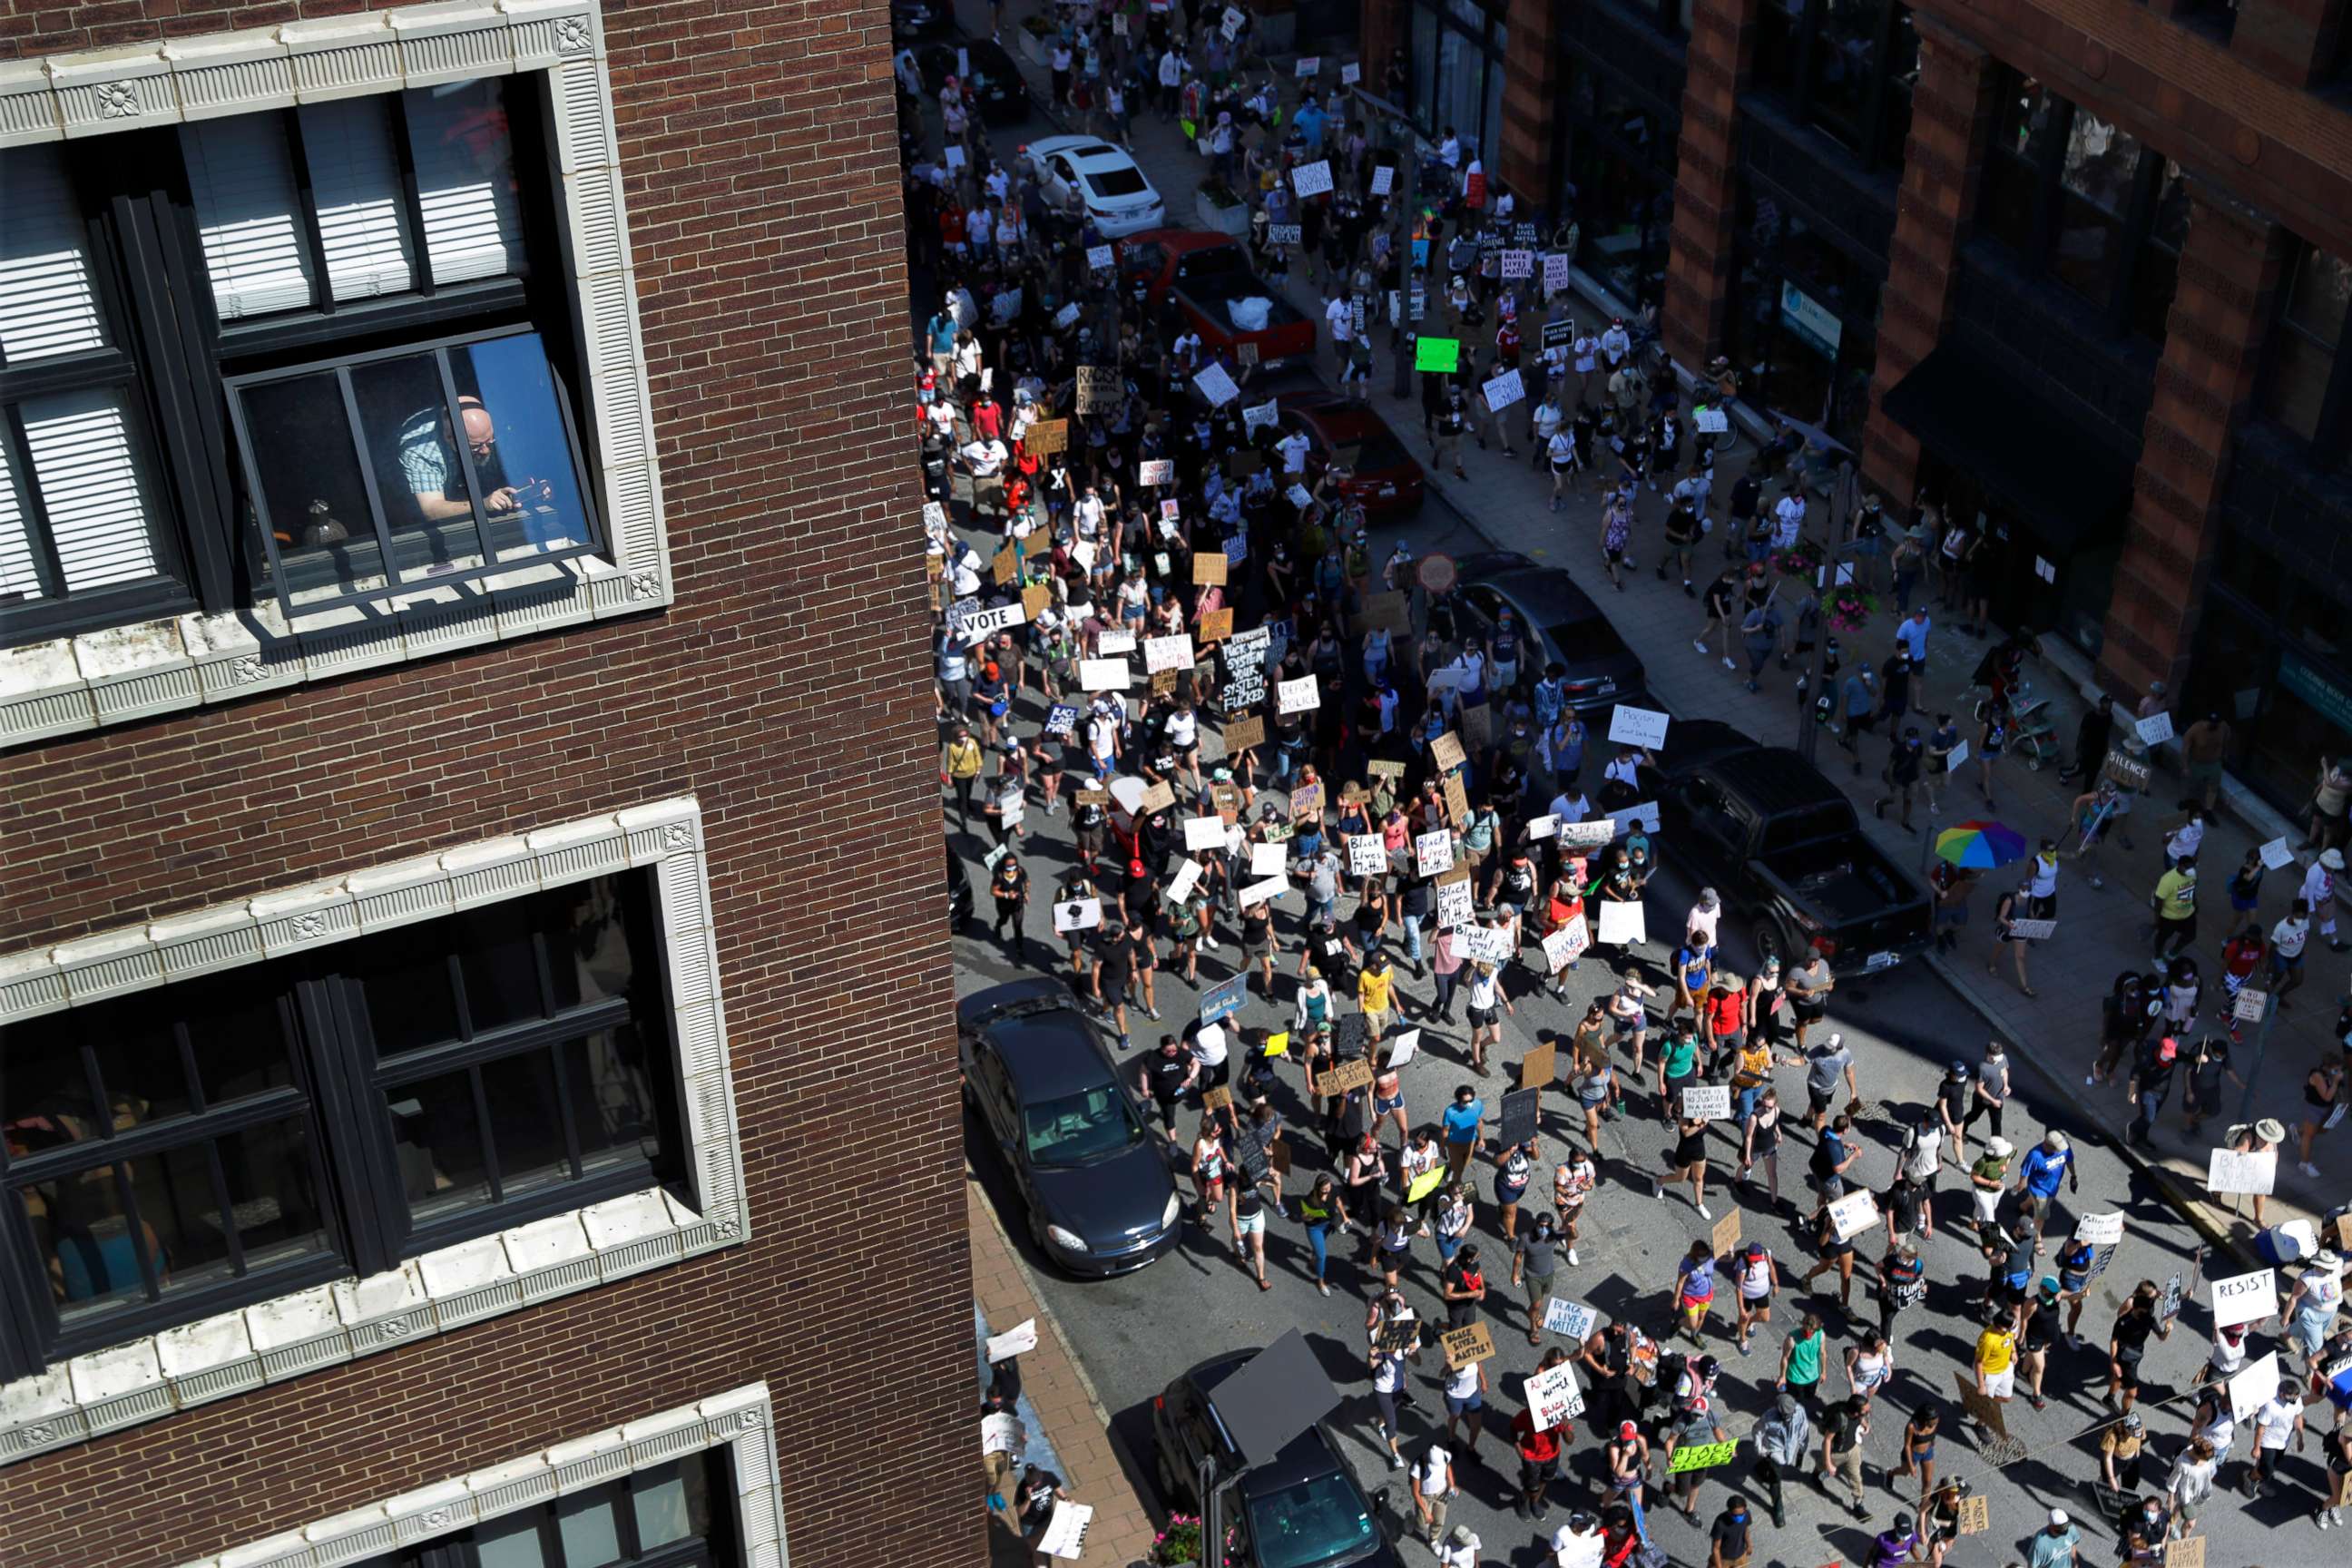 PHOTO: A person, upper left, holds a phone while watching from a window as protesters march in the street below Sunday, June 7, 2020, in St. Louis, Mo.